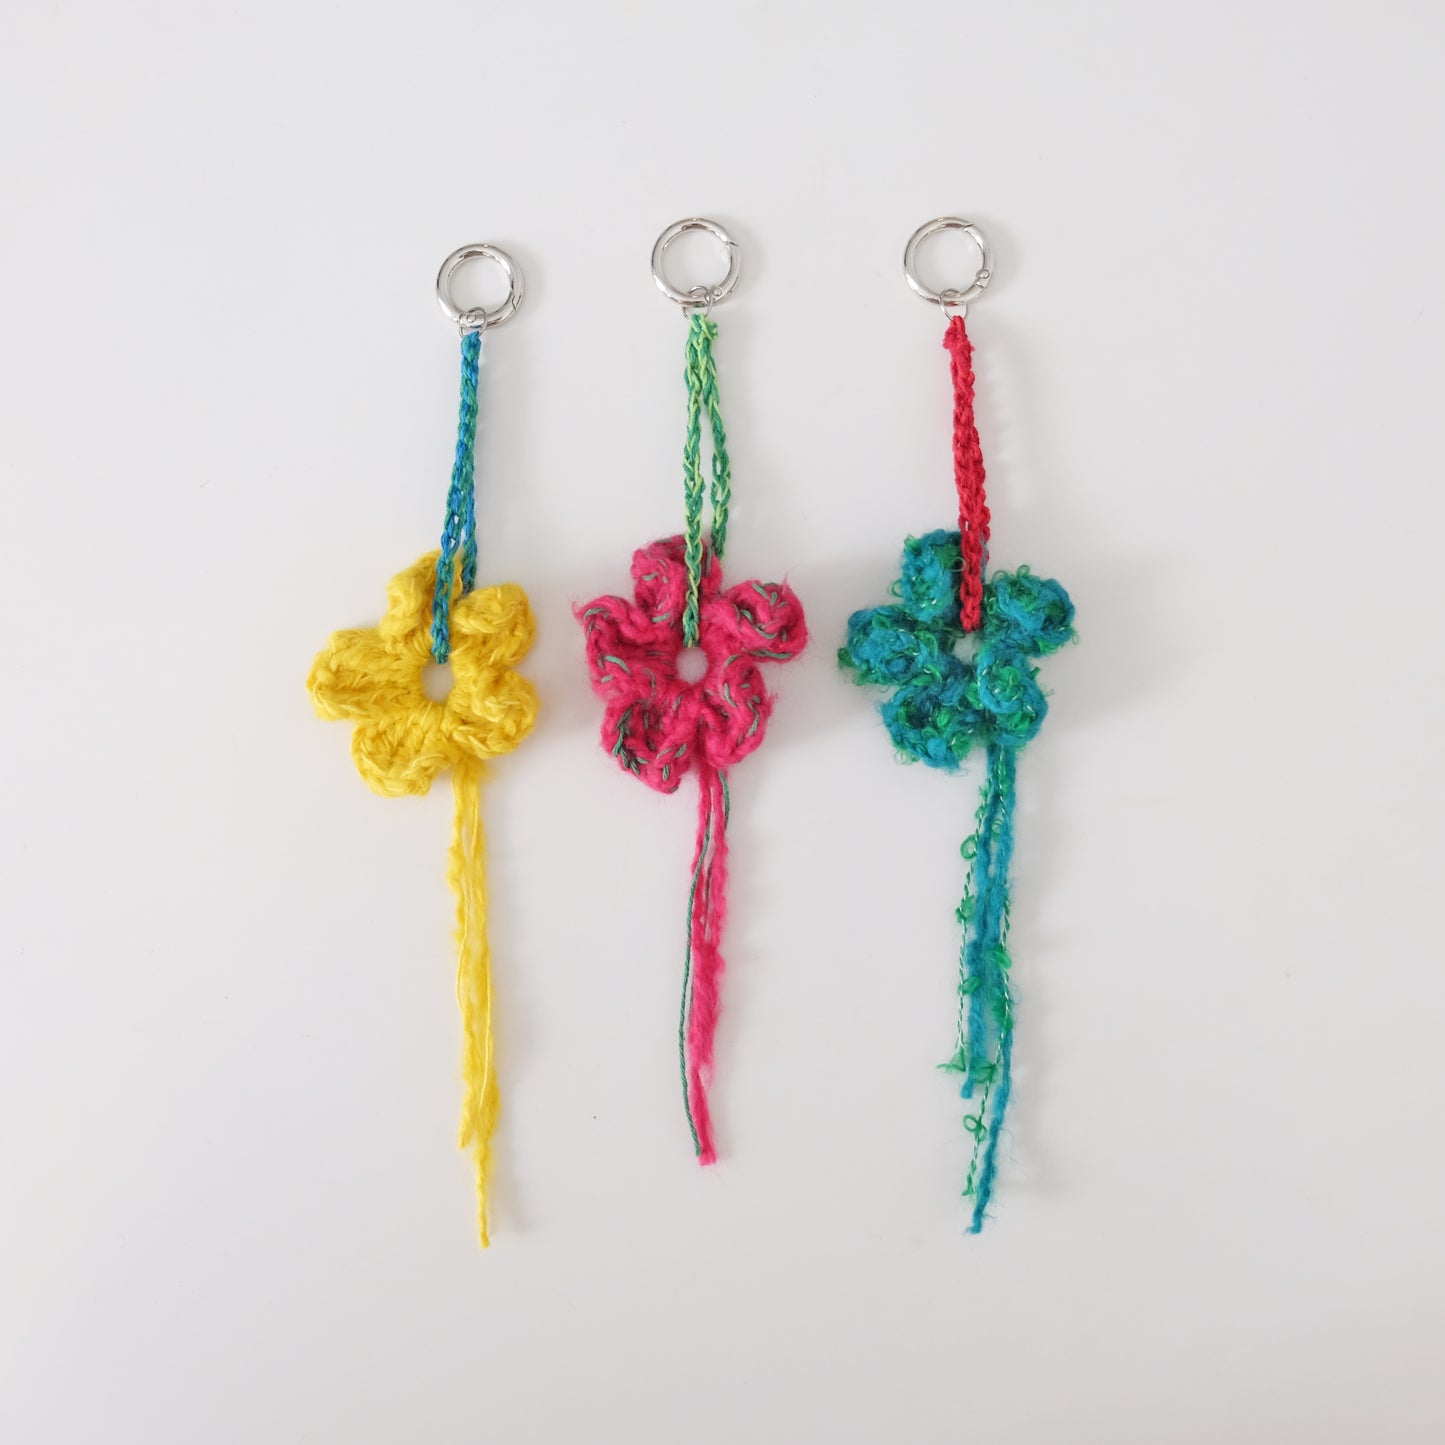 Mixed Blossom Keychain in green